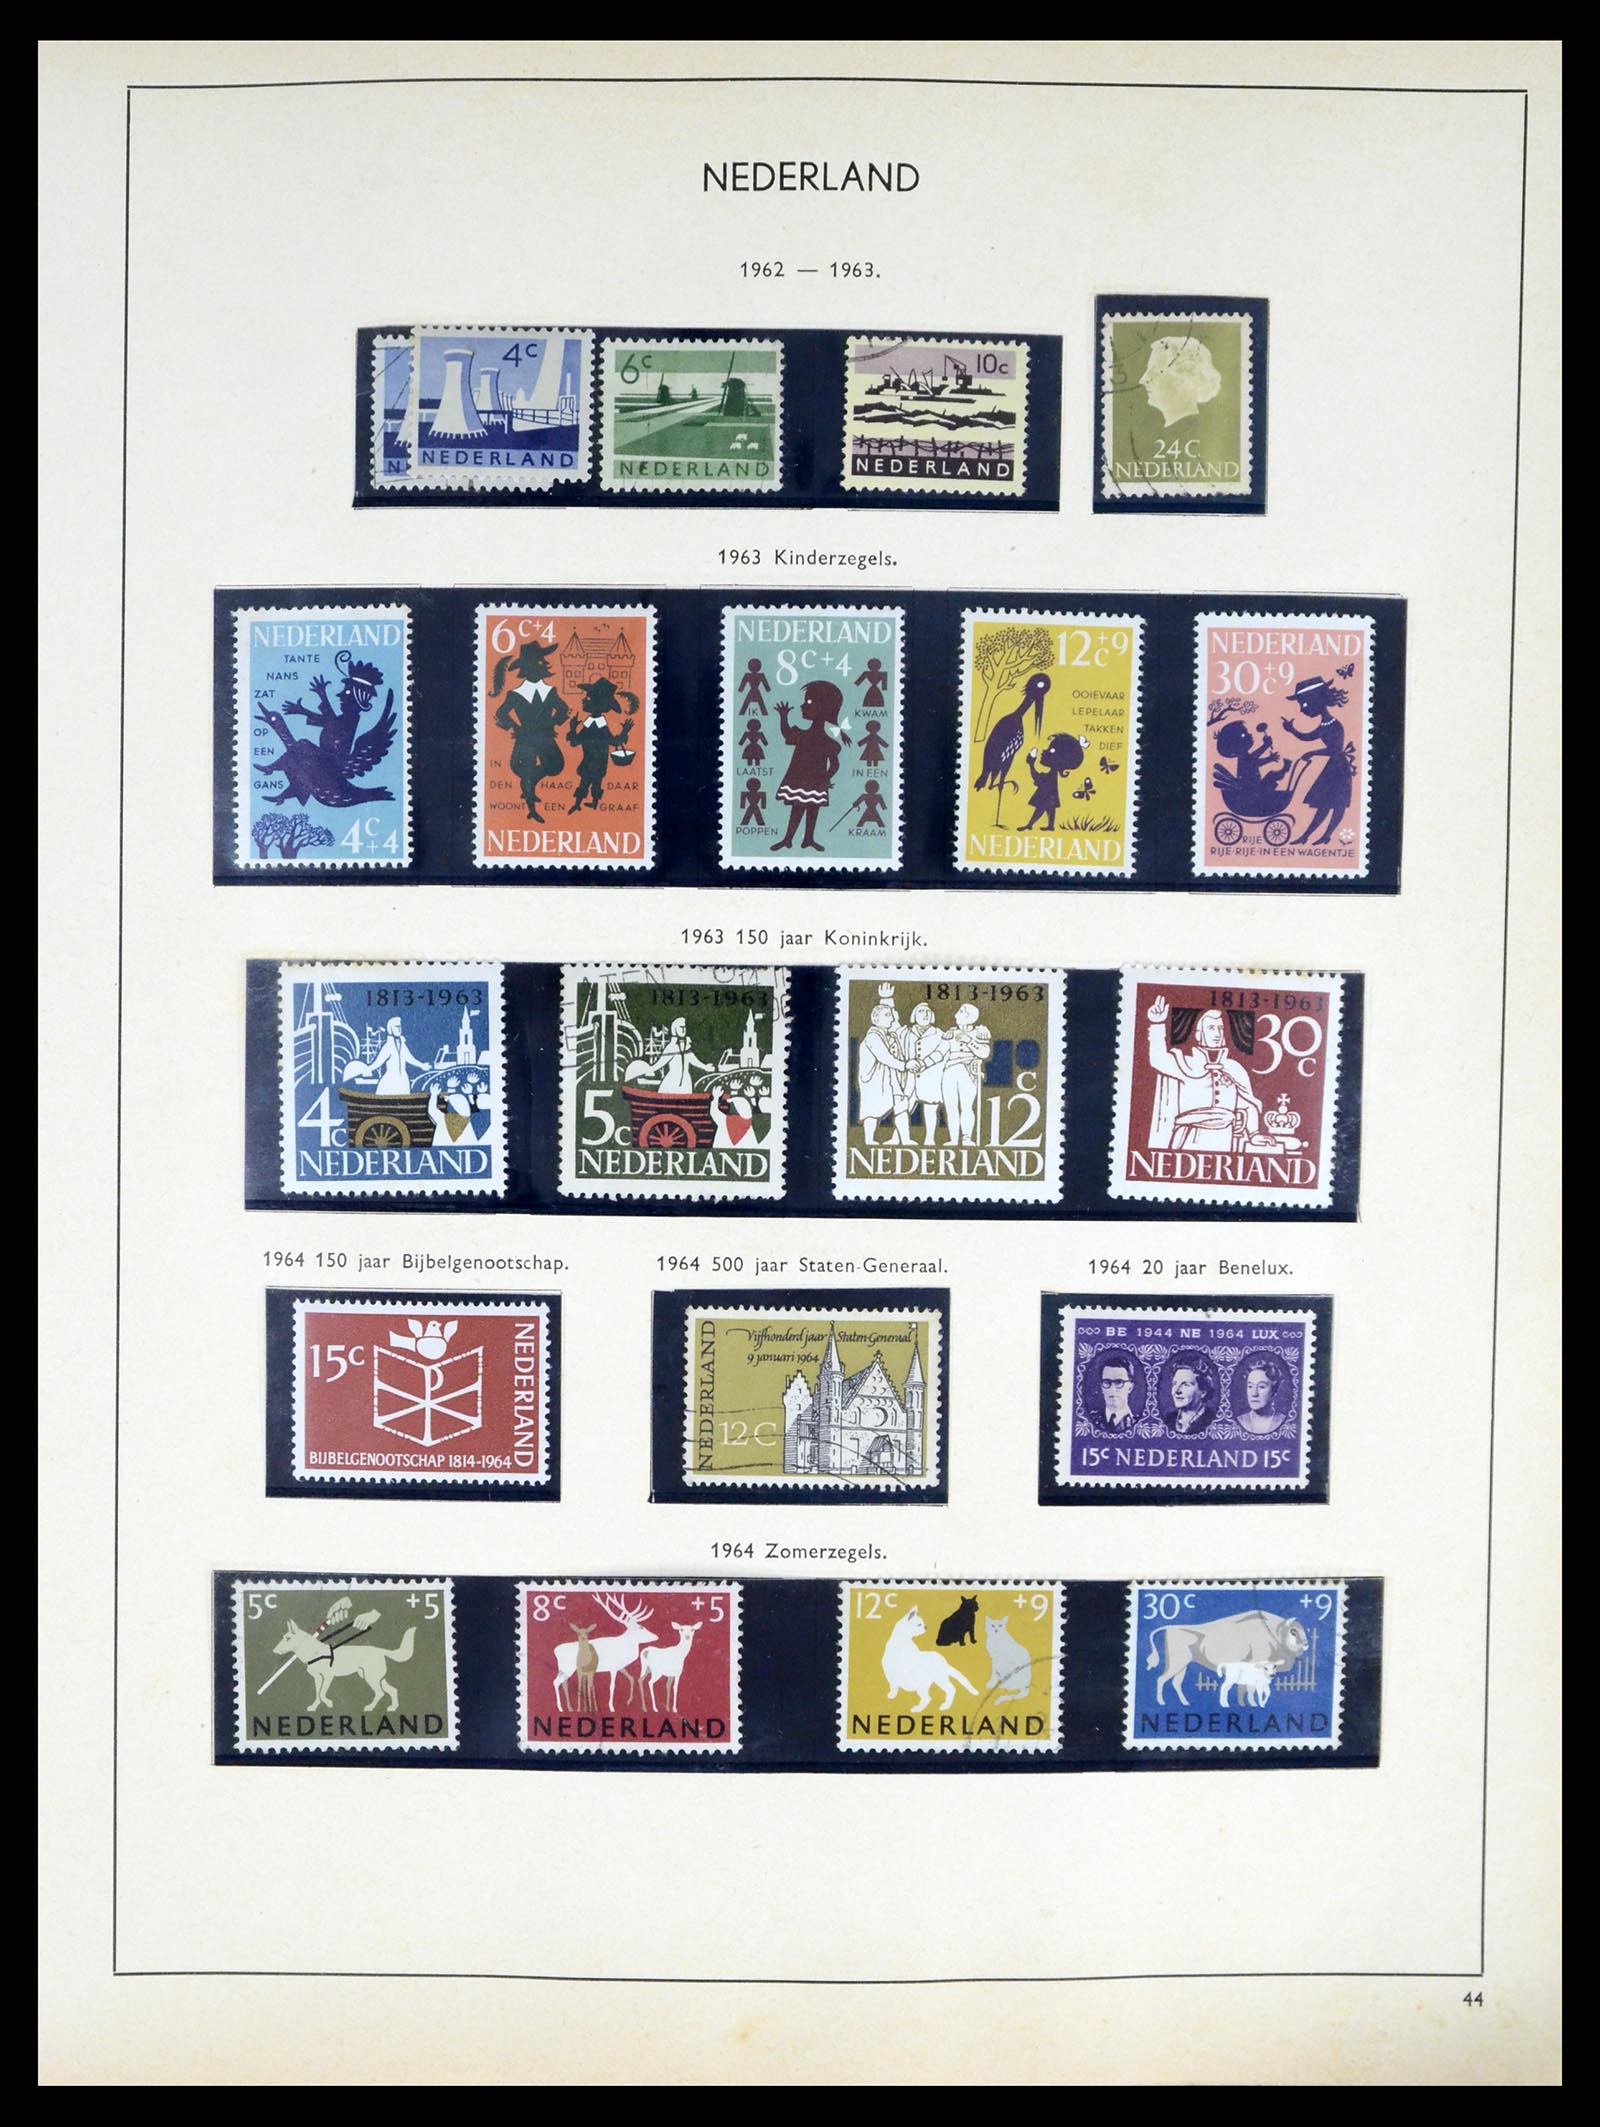 37618 040 - Stamp collection 37618 Netherlands and territories 1852-1972.